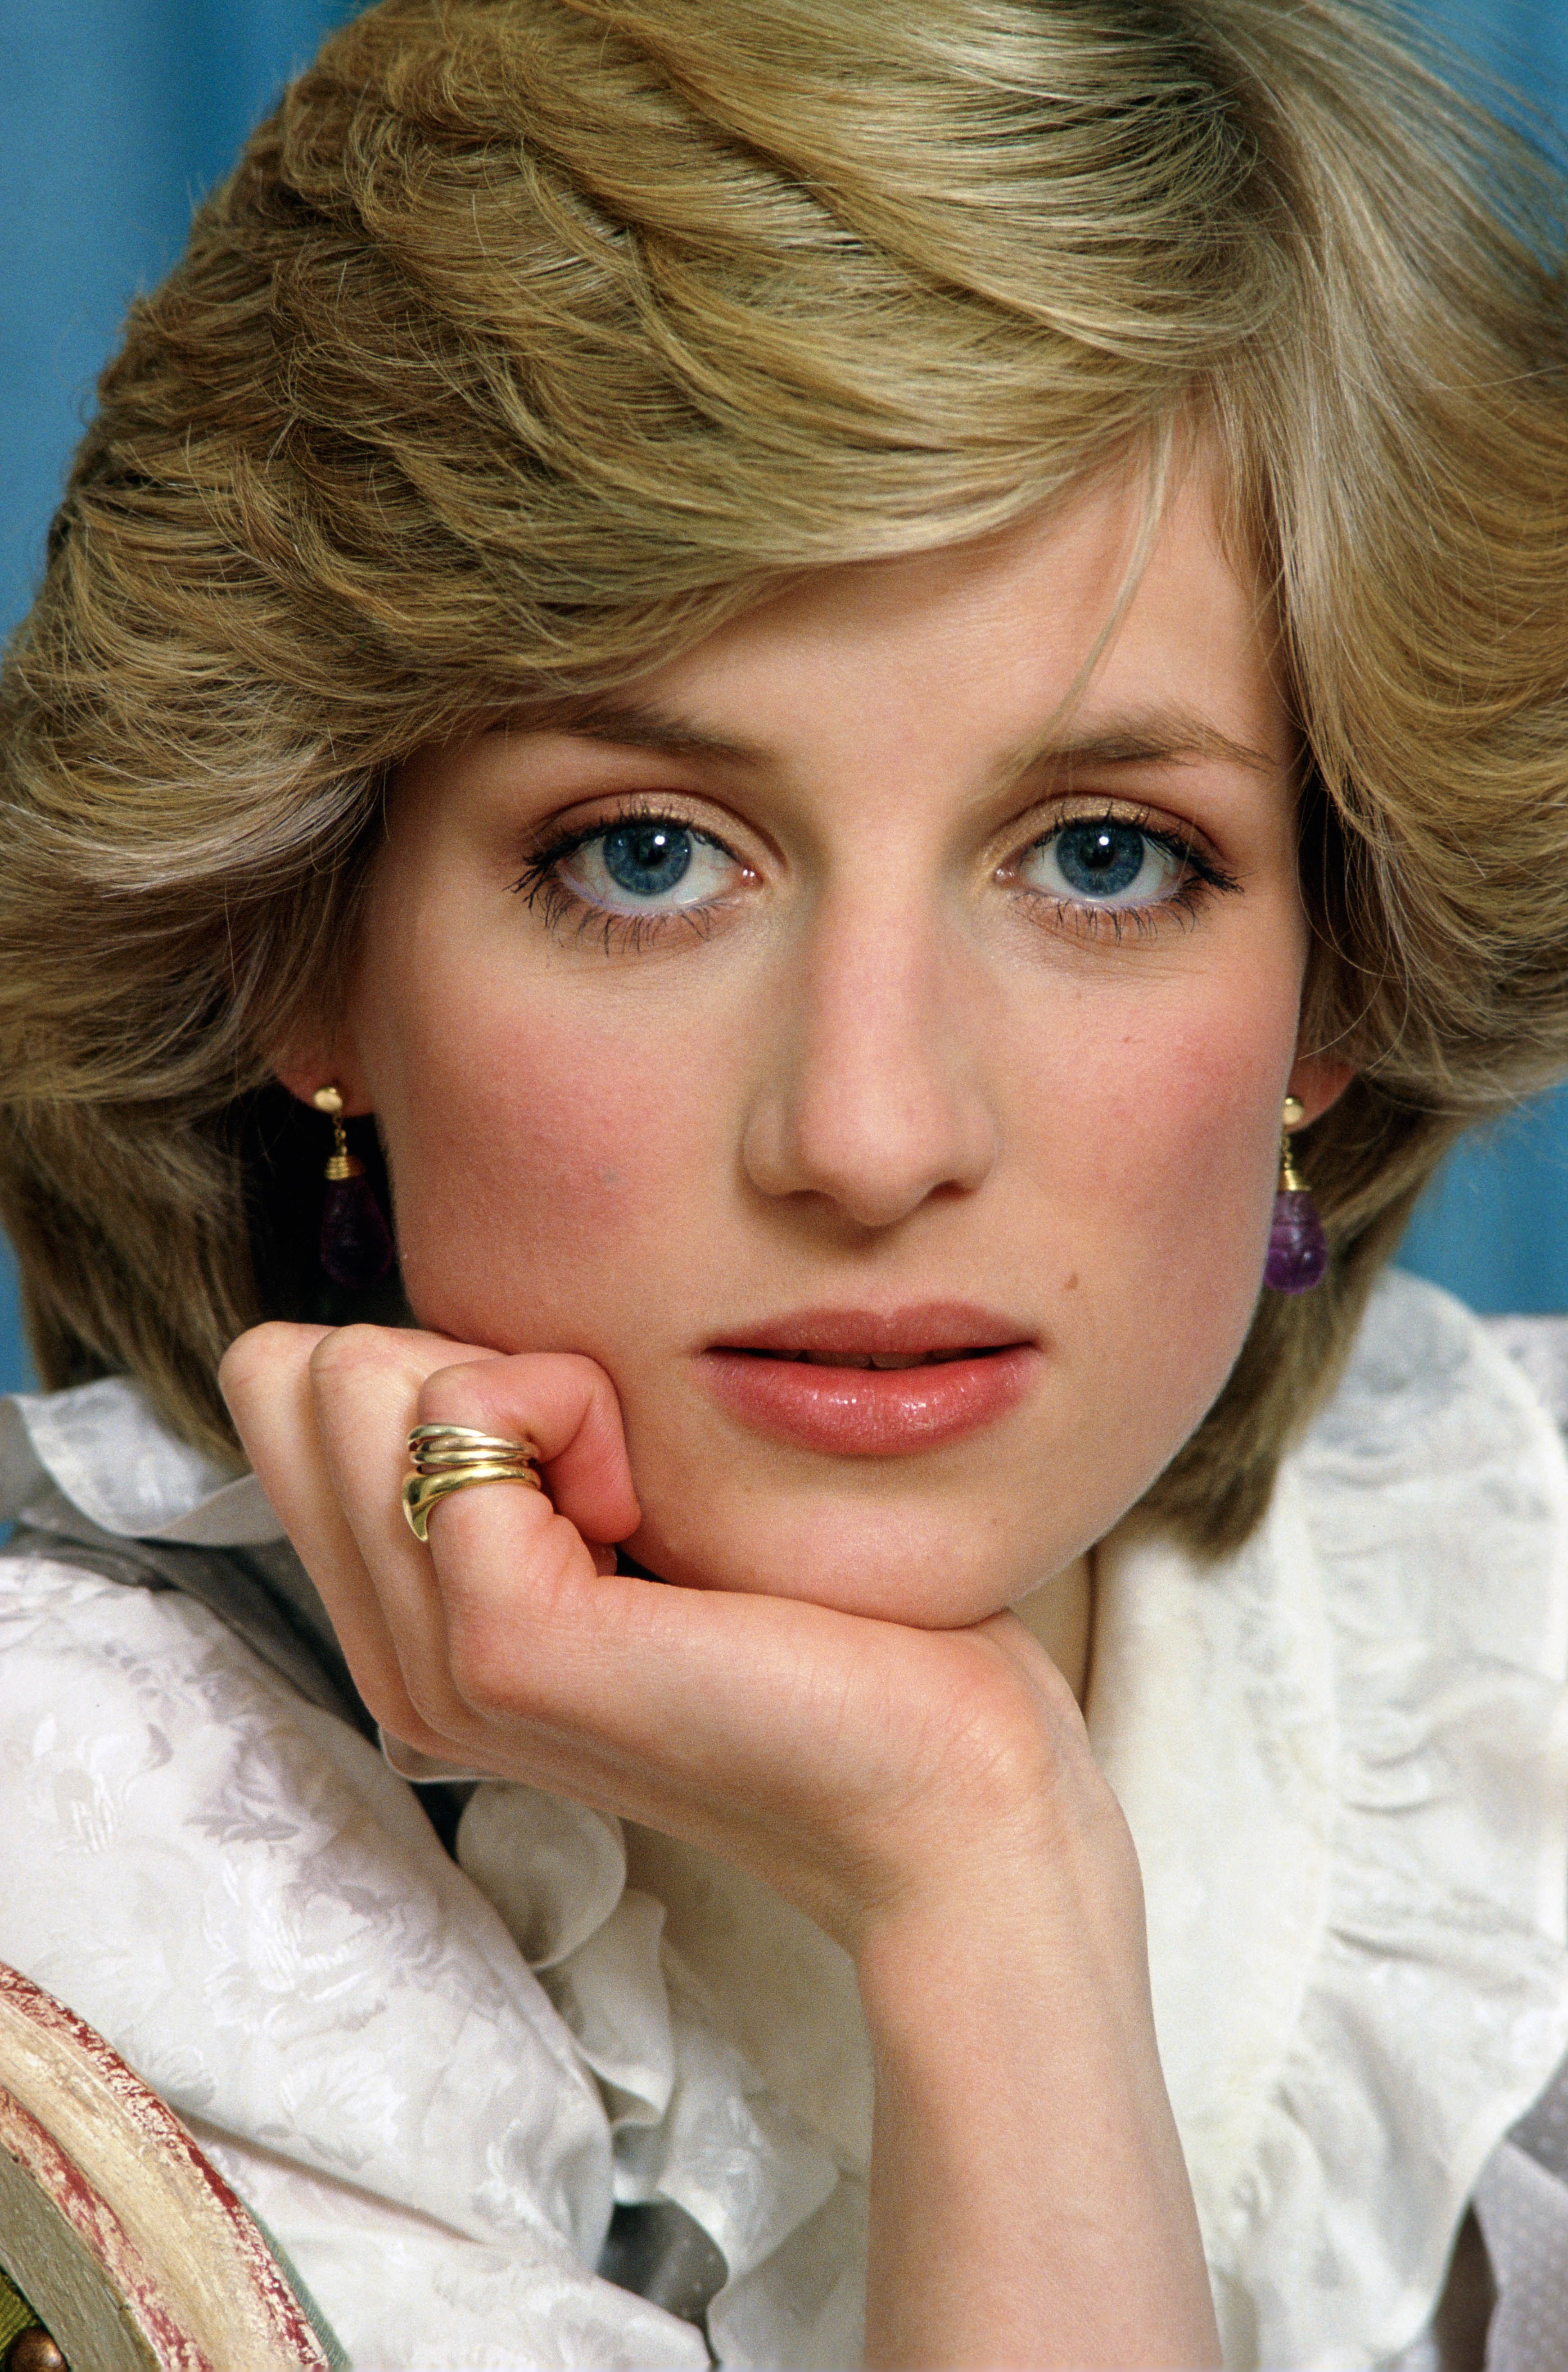 GREAT BRITAIN - FEBRUARY 01:  Diana, Princess of Wales at home in Kensington Palace  (Photo by Tim Graham Photo Library via Getty Images) (Foto: Tim Graham Photo Library via Get)